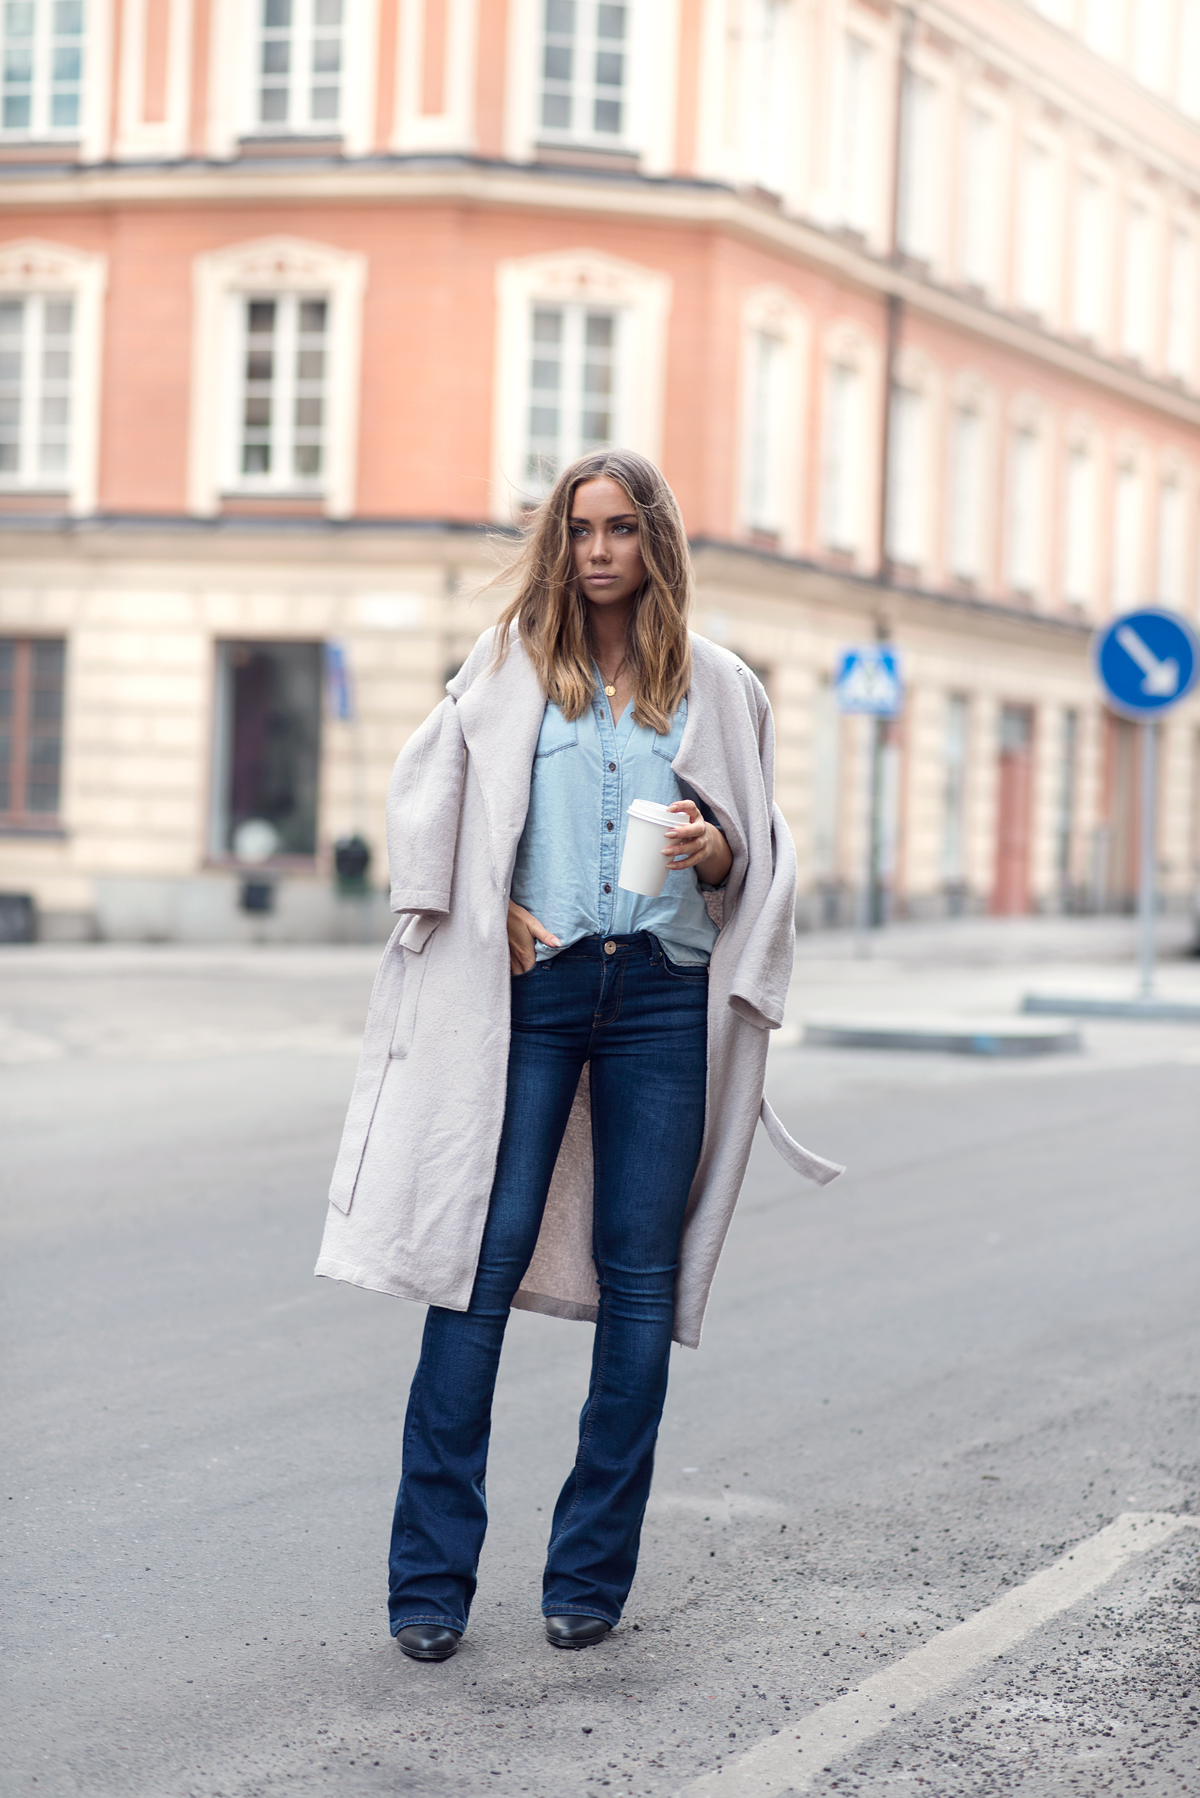 How to Style Flared Jeans This Fall